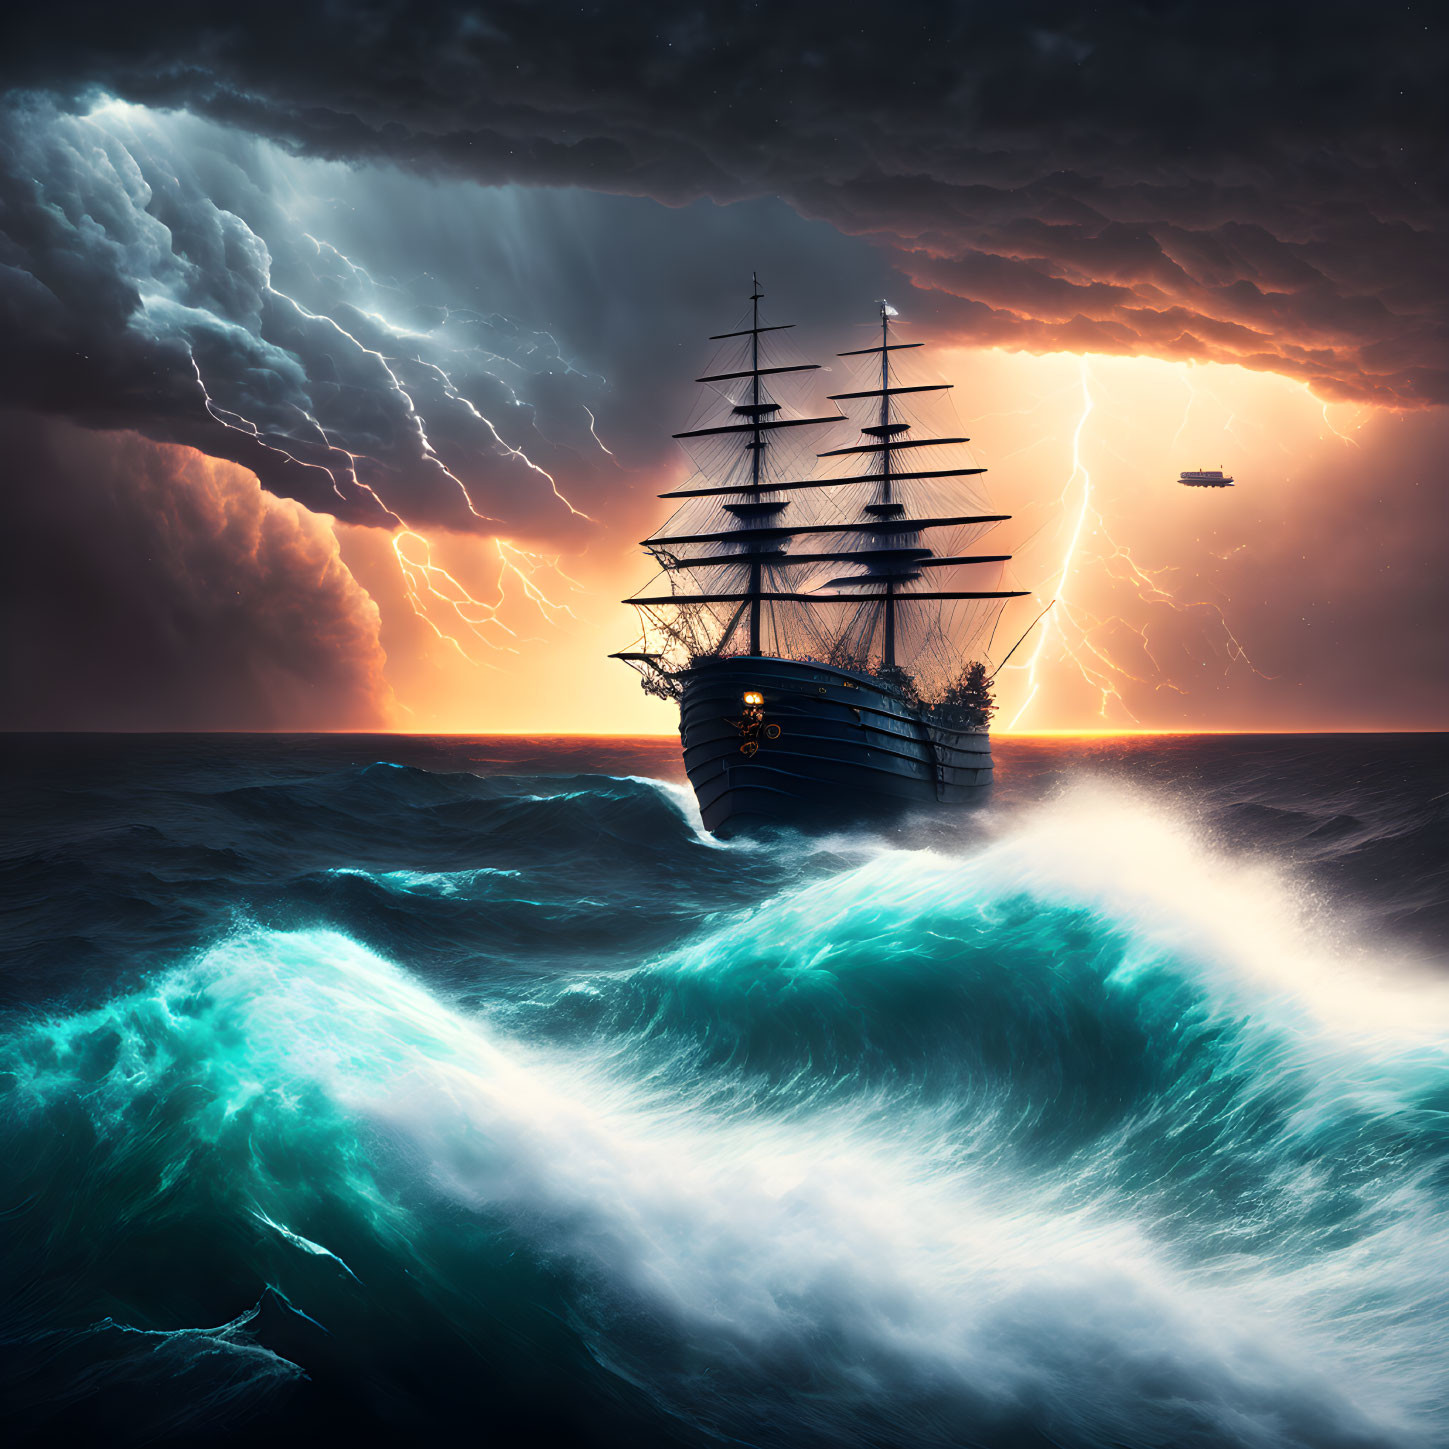 Stormy sea scene with tall ship and flying vessel under dark clouds